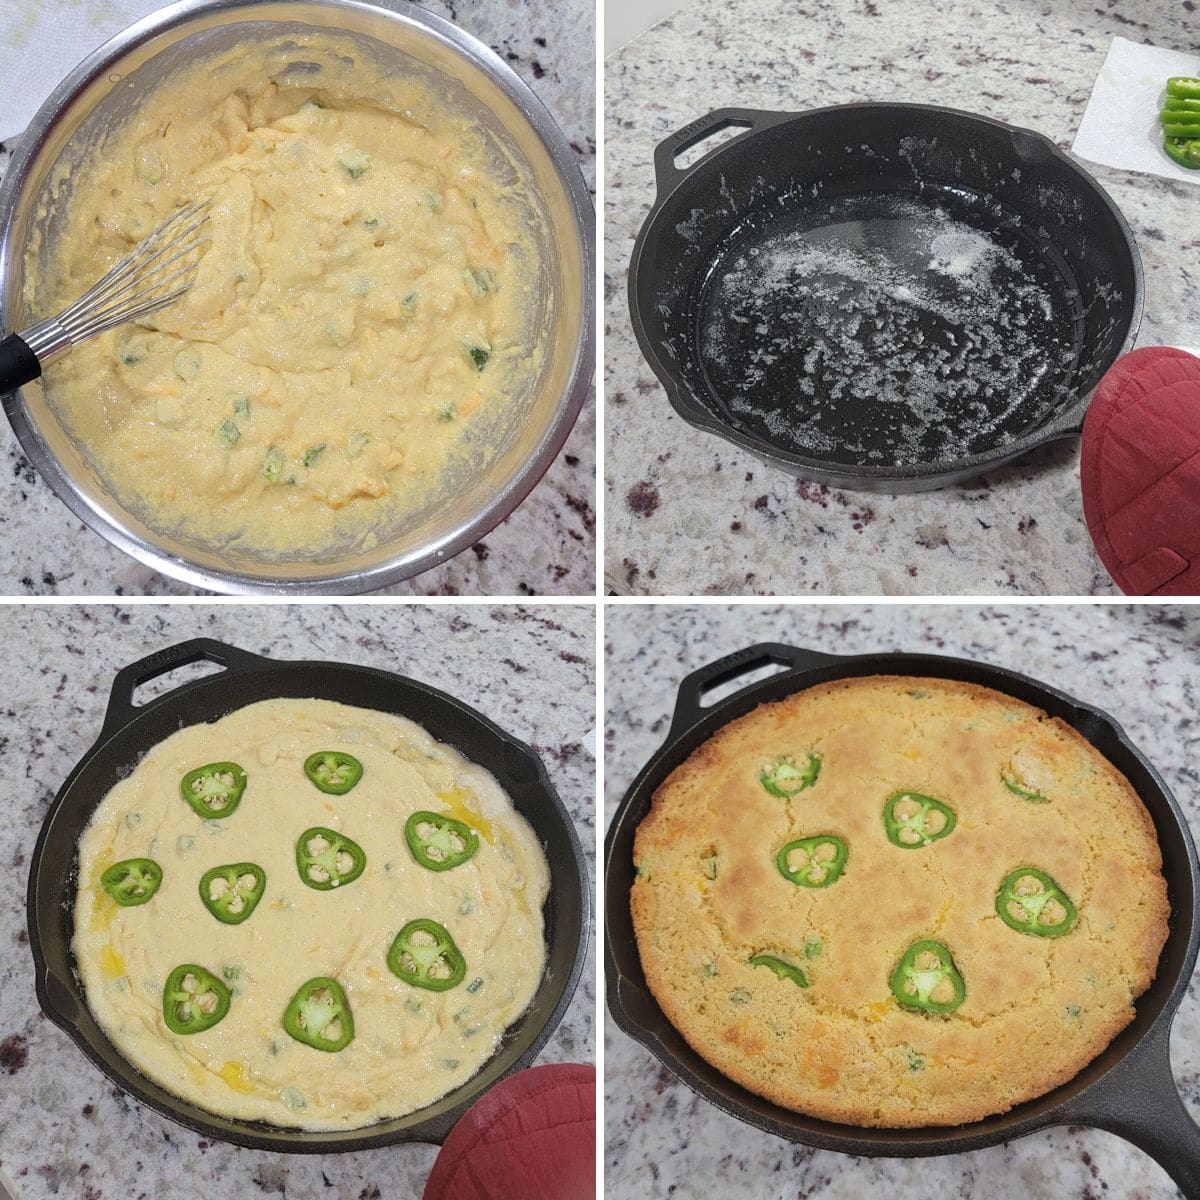 Making skillet cornbread with jalapeno slices on top.